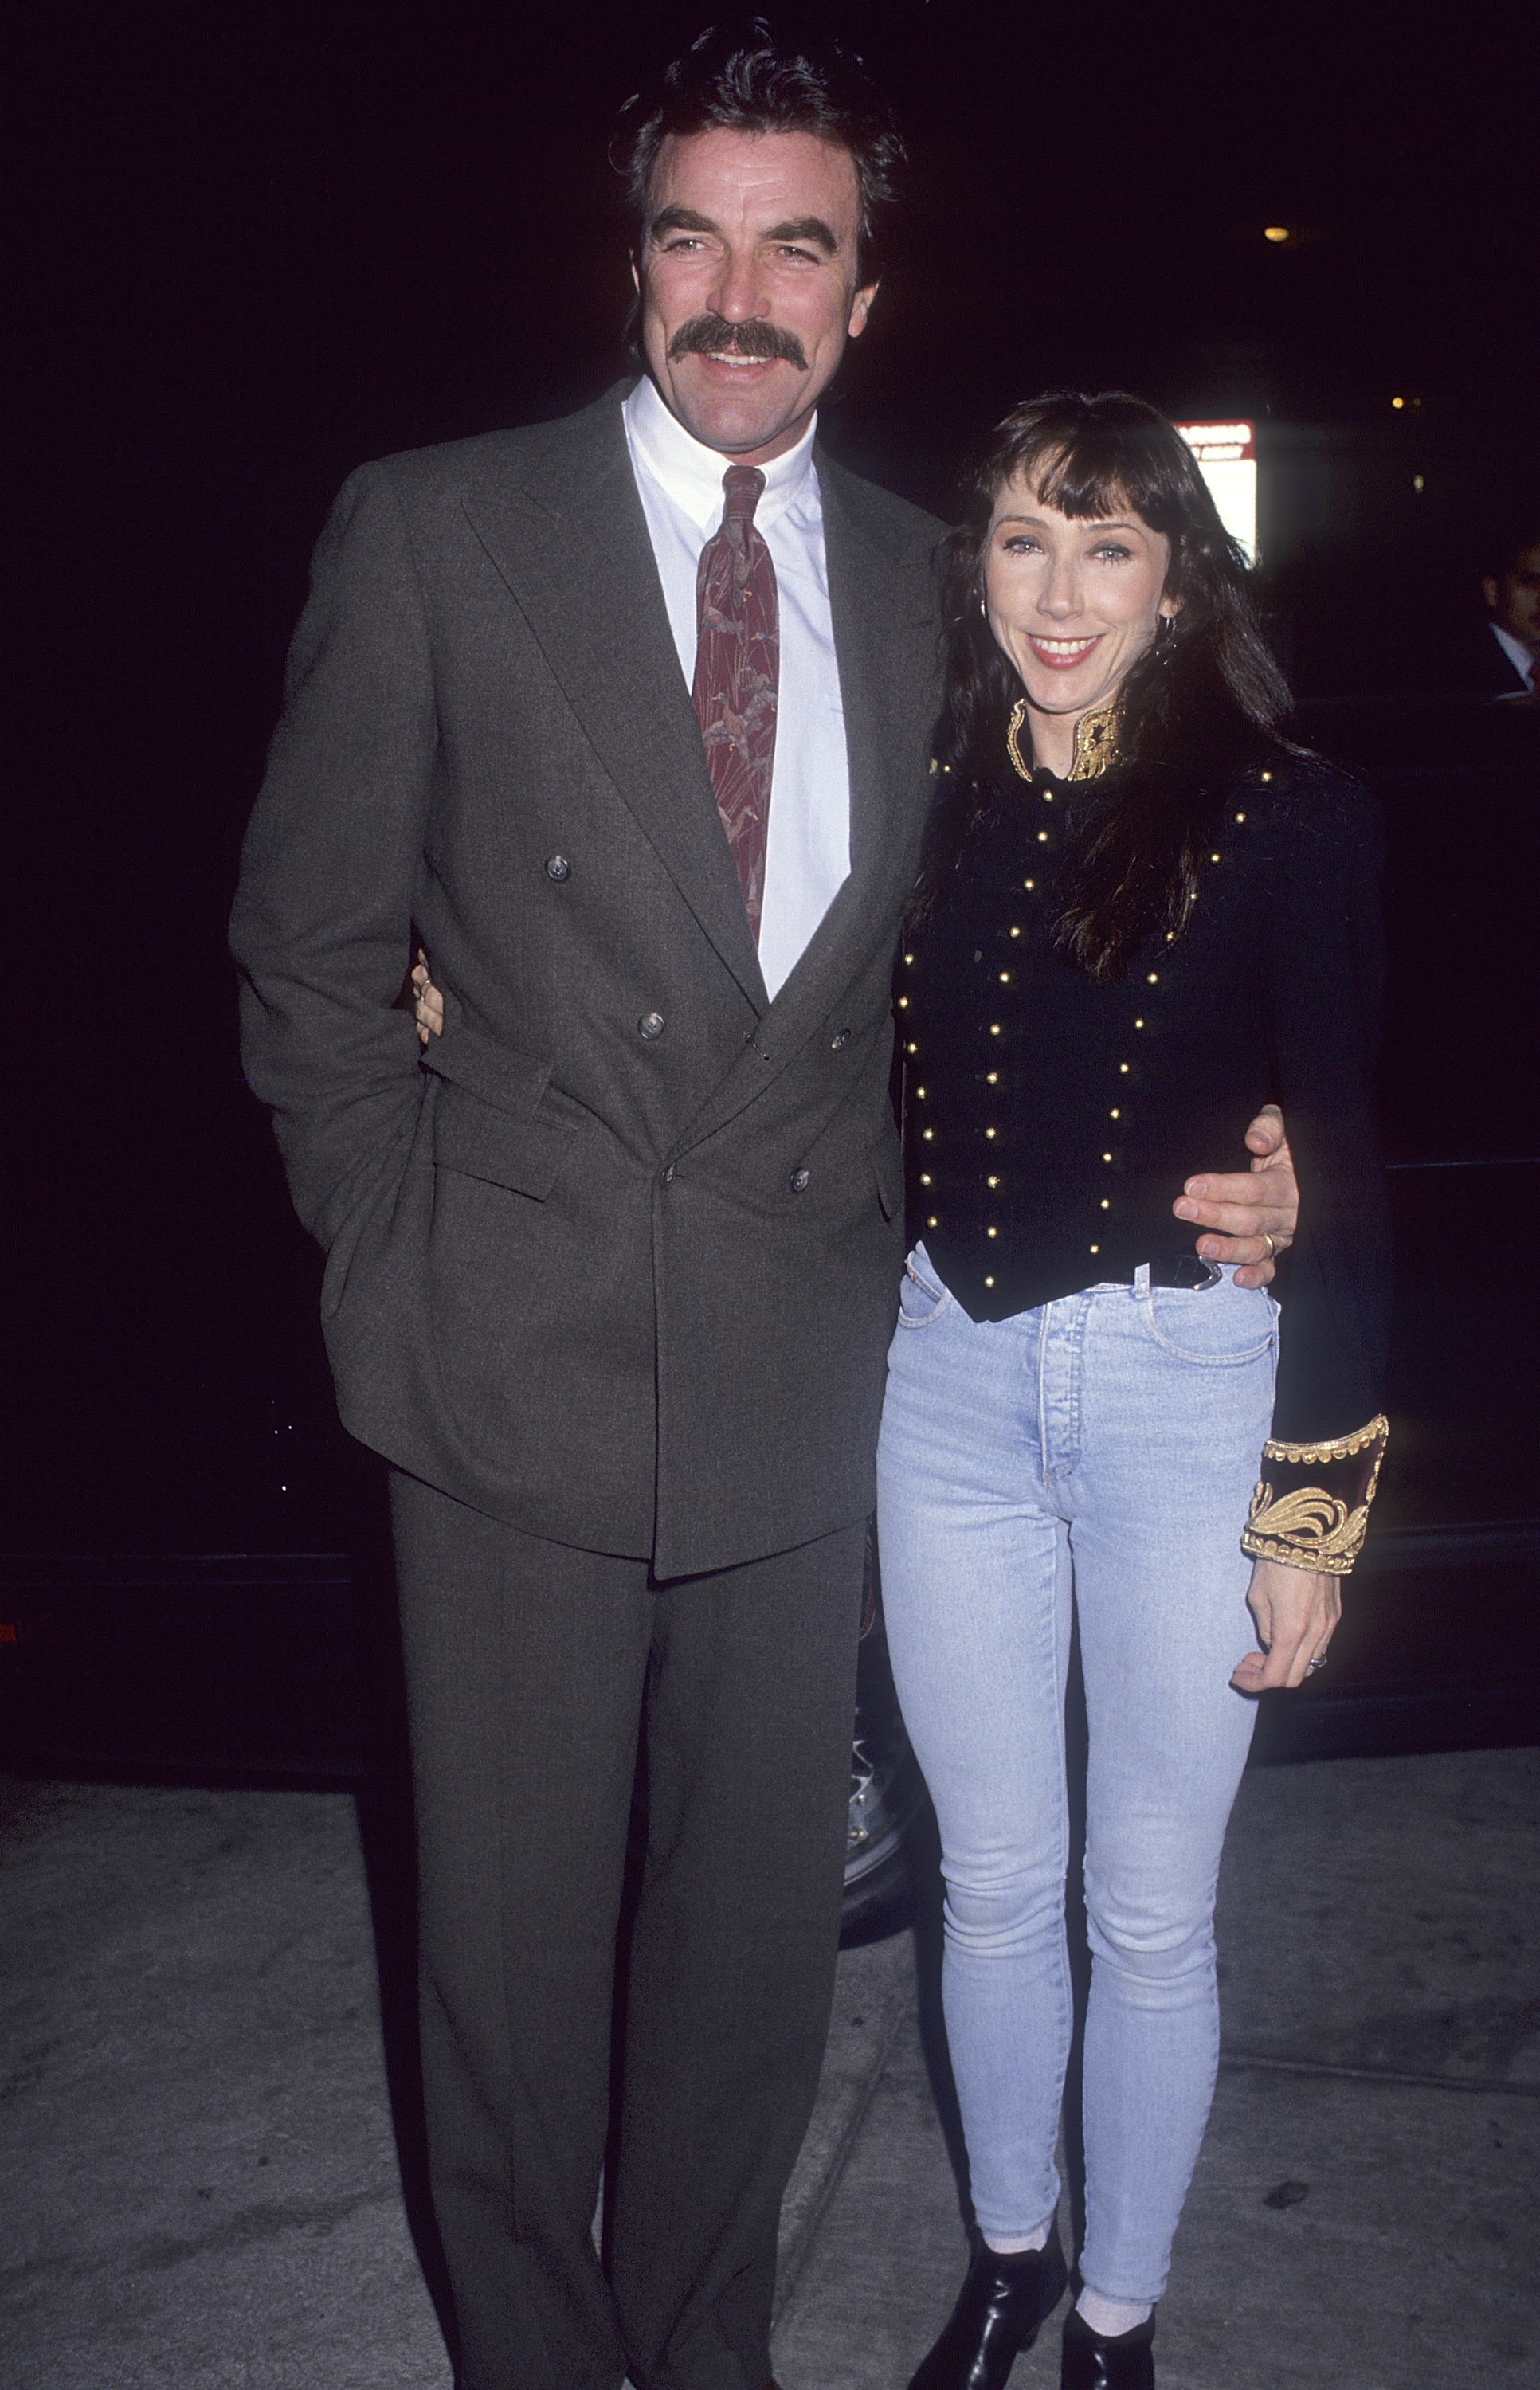 Tom Selleck and Jillie Mack dine at Spago in West Hollywood, California on January 17, 1991. | Source: Getty Images